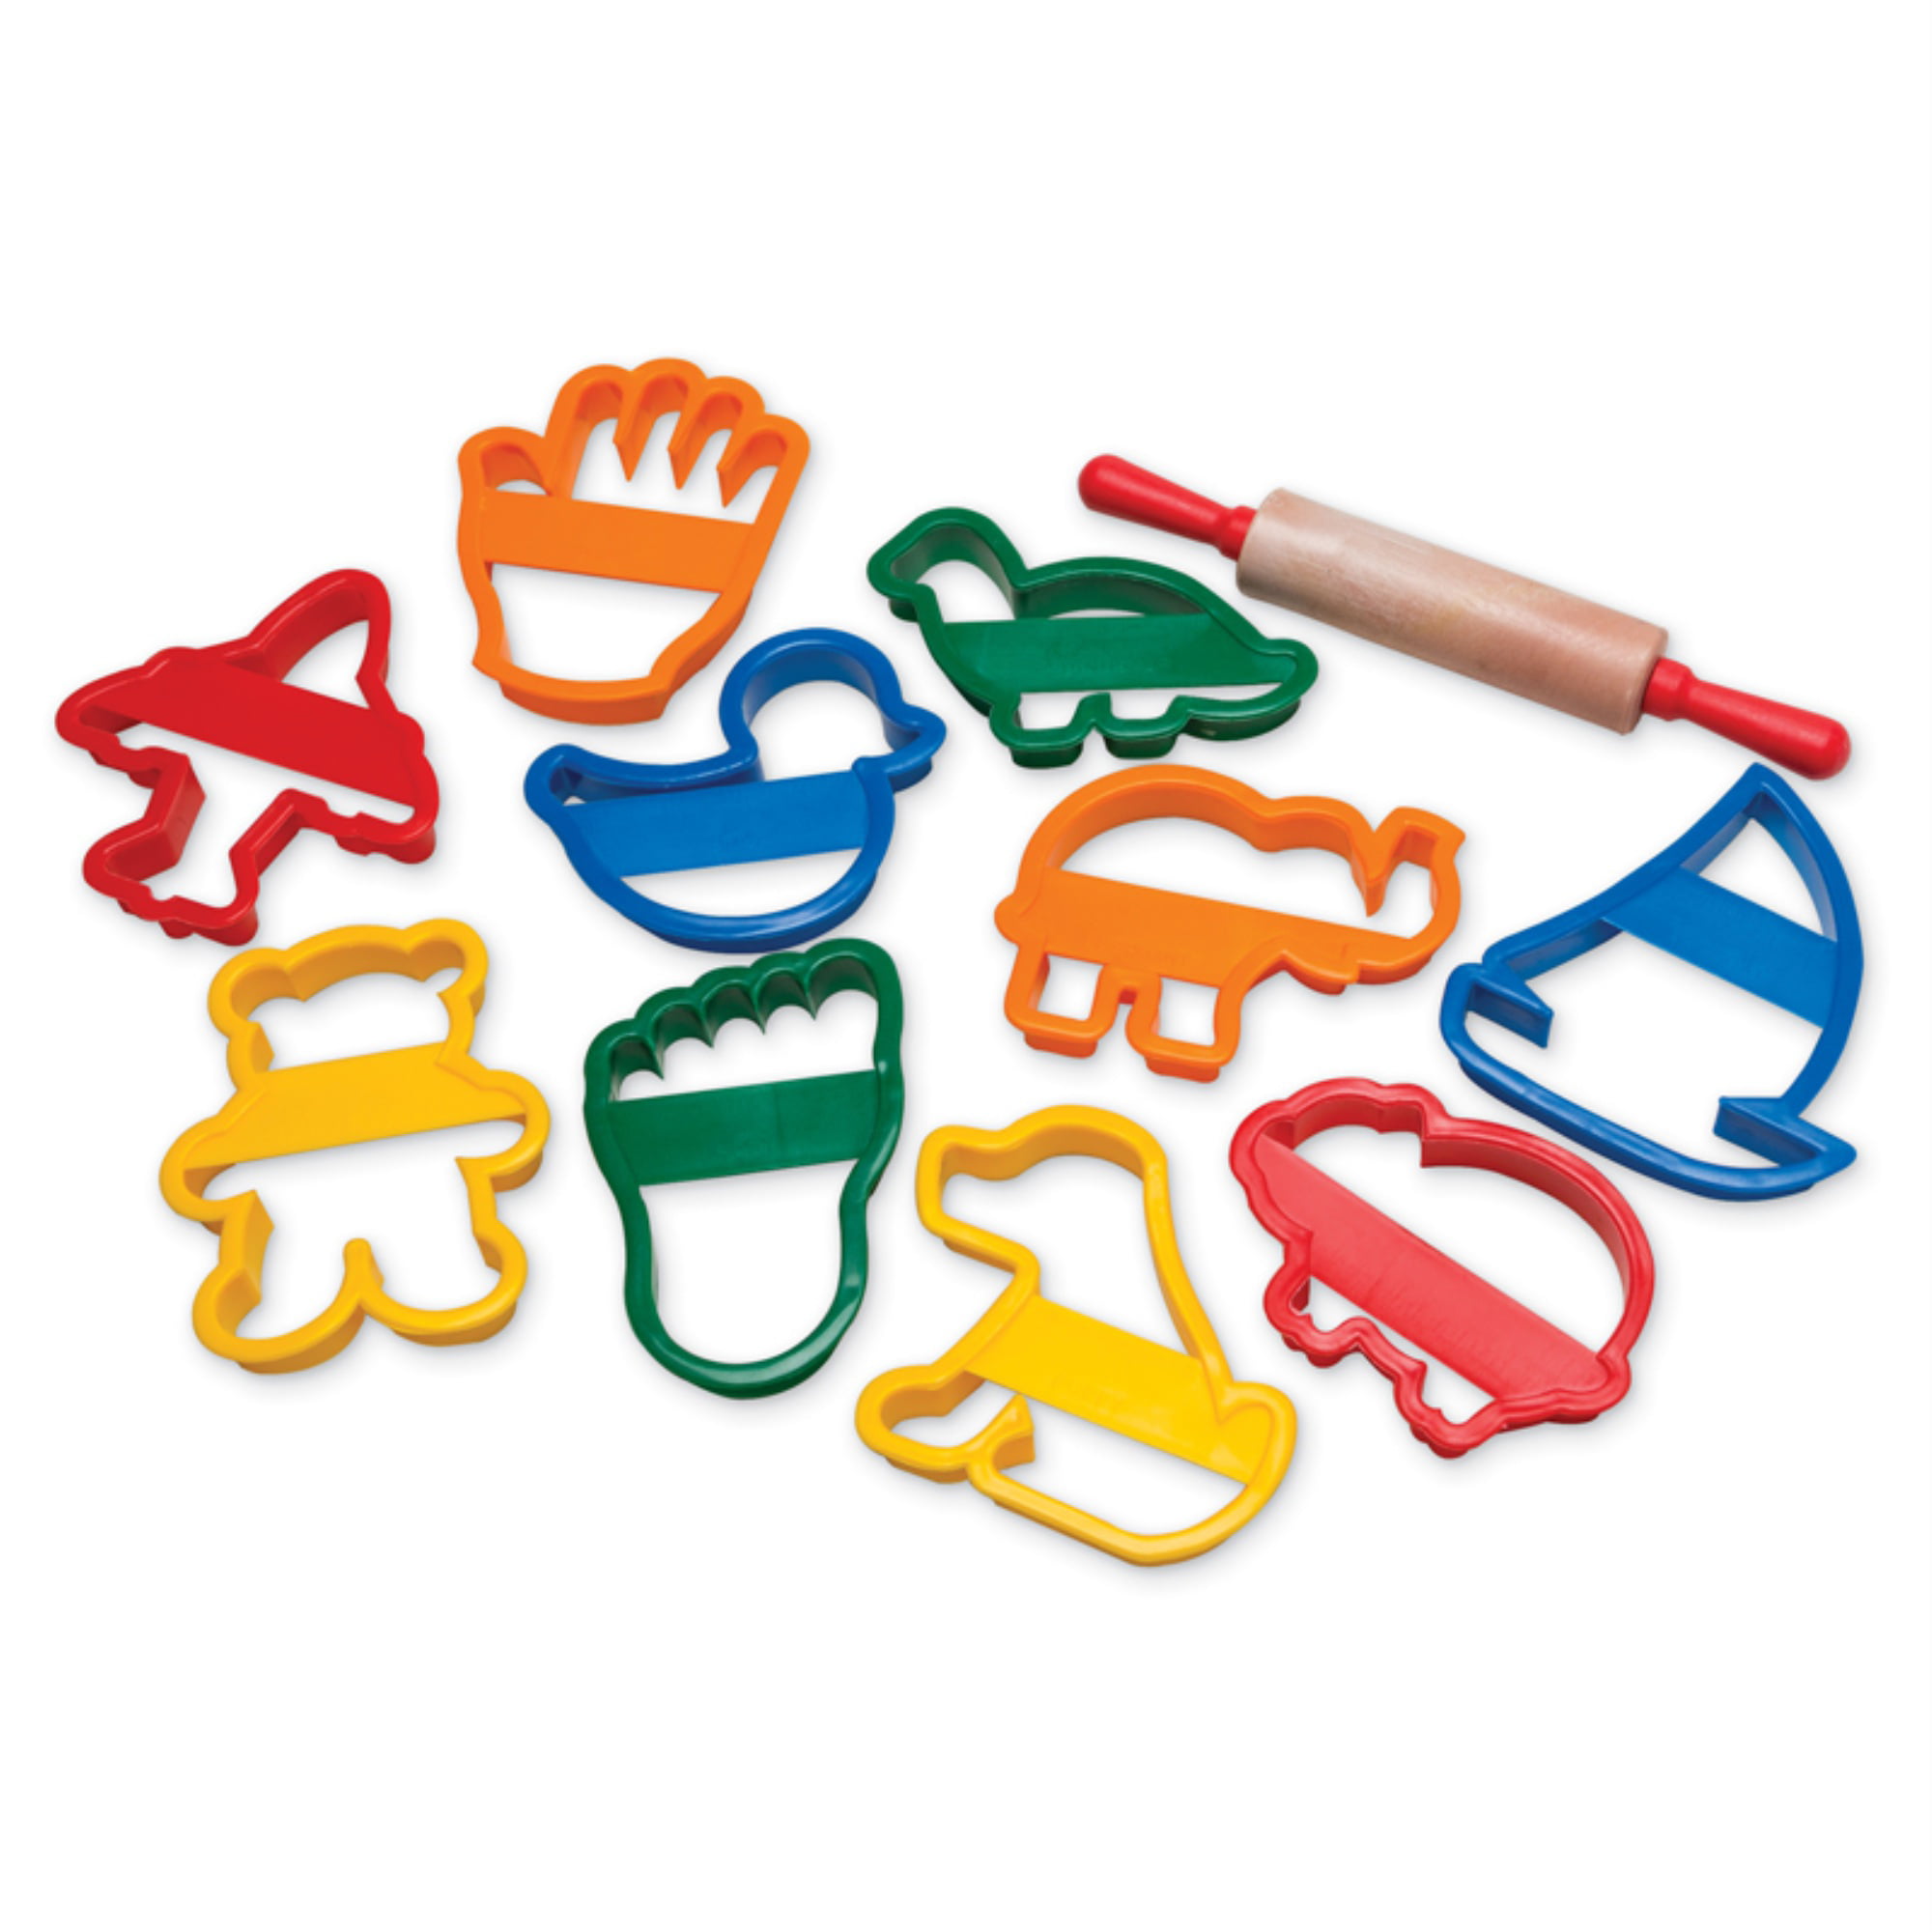 Kids Play Dough Tools Set Doh Clay Modelling Rolling Pins Cookie Cutters Pin PK 